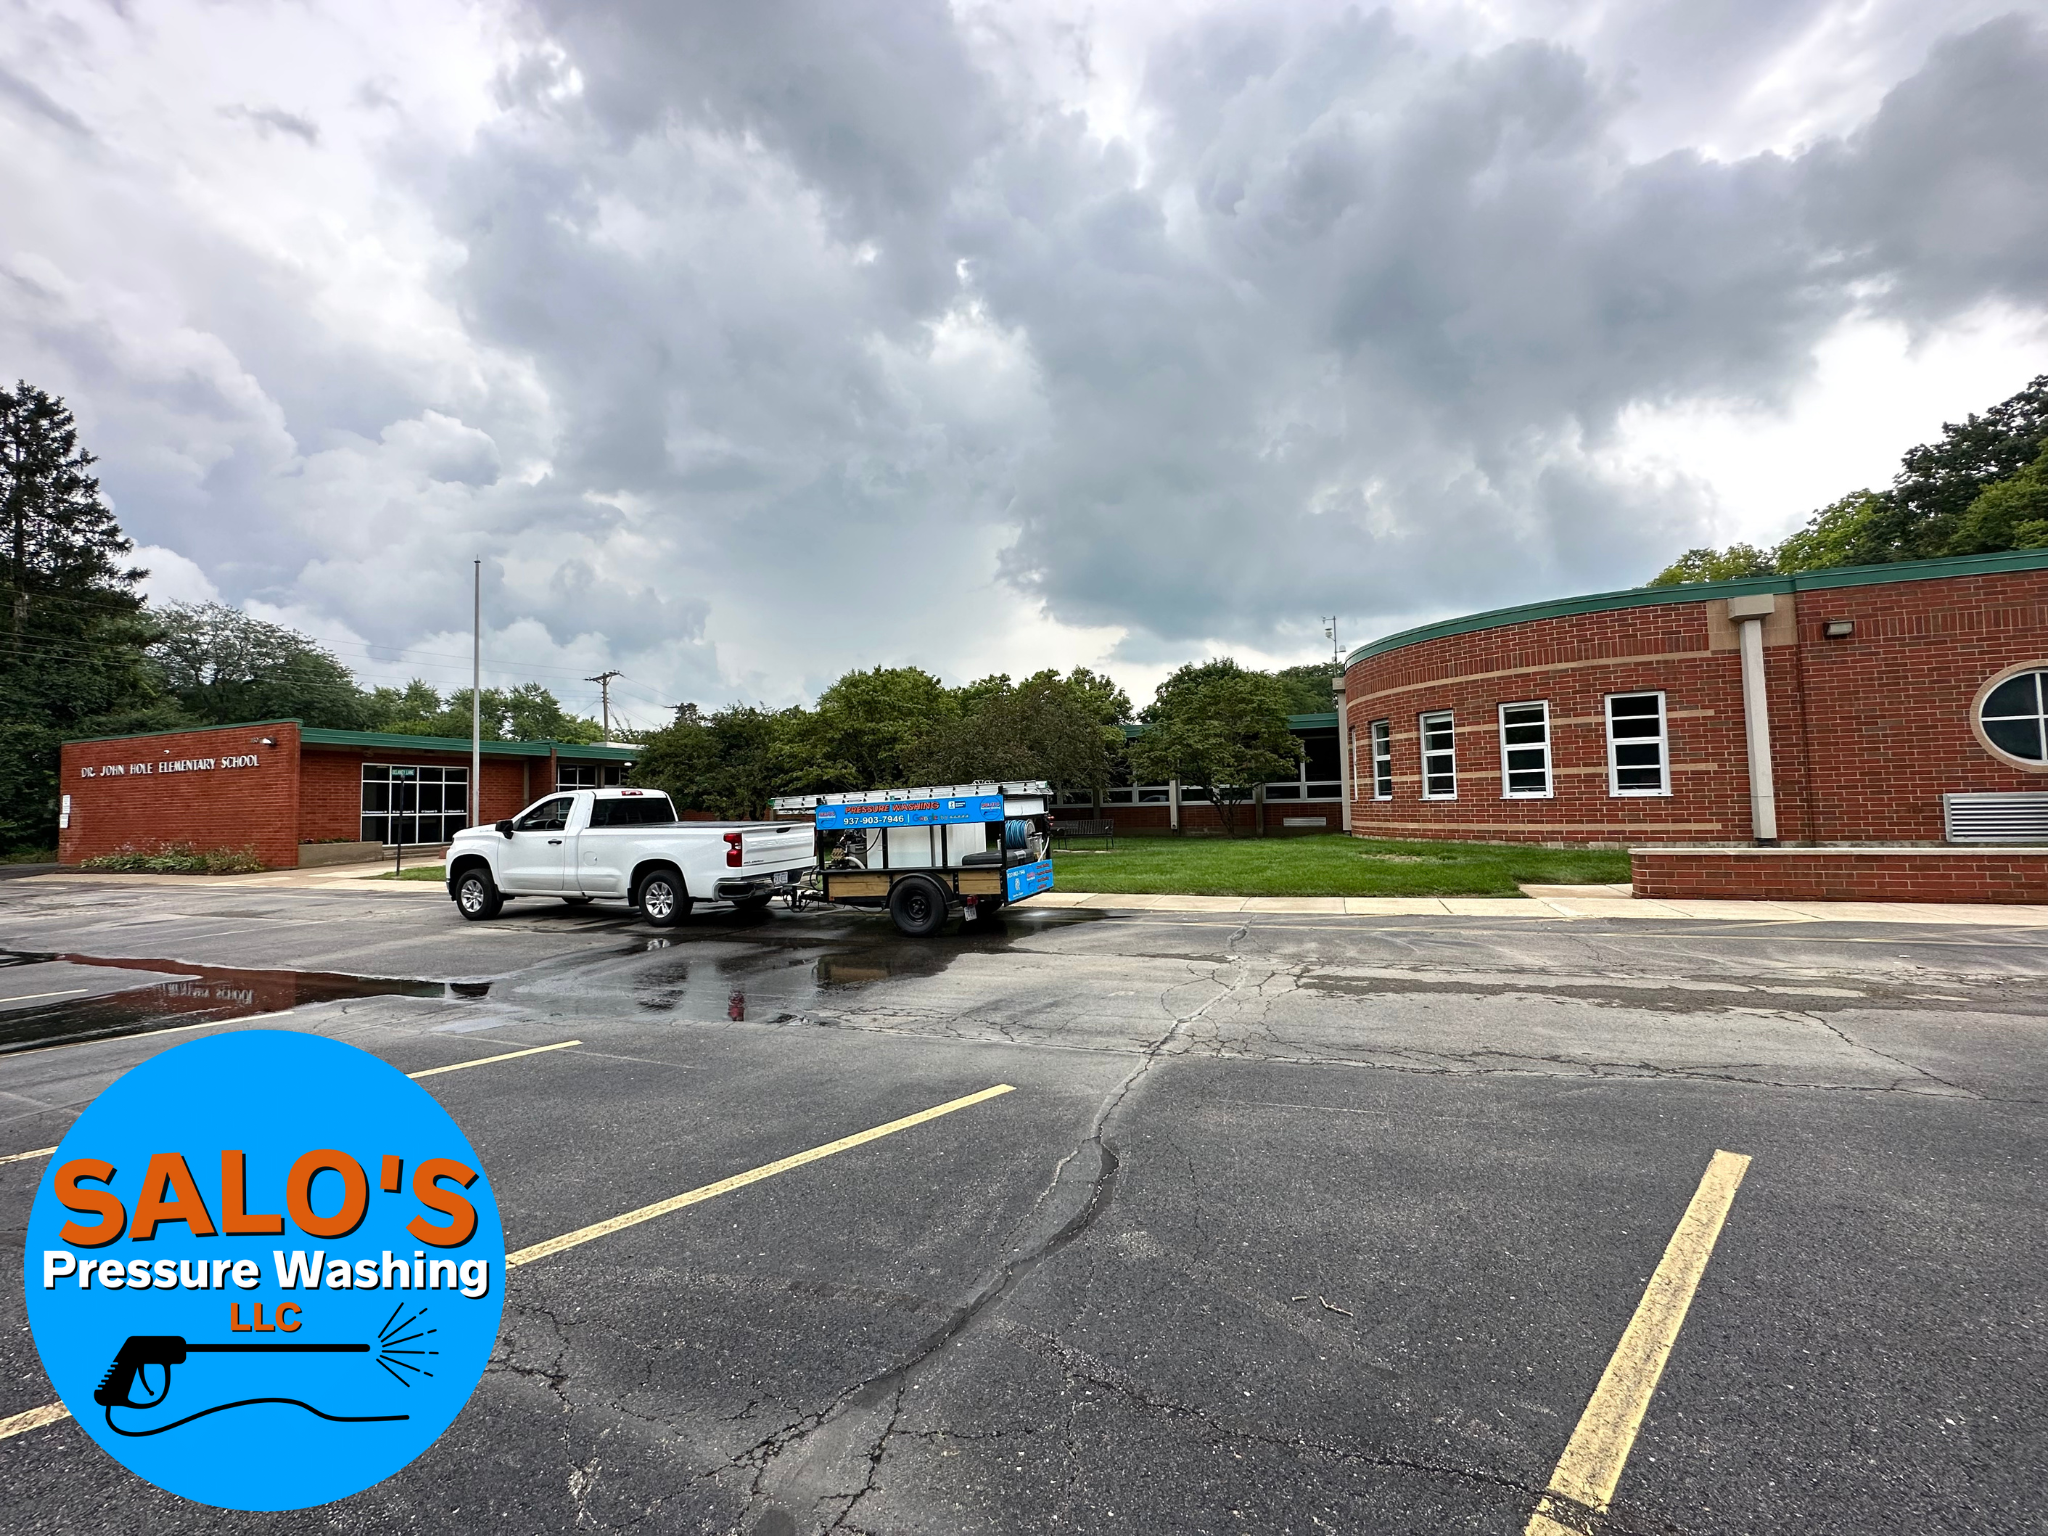 Professional Commercial Pressure Washing at Dr. John Hole Elementary School in Centerville, OH